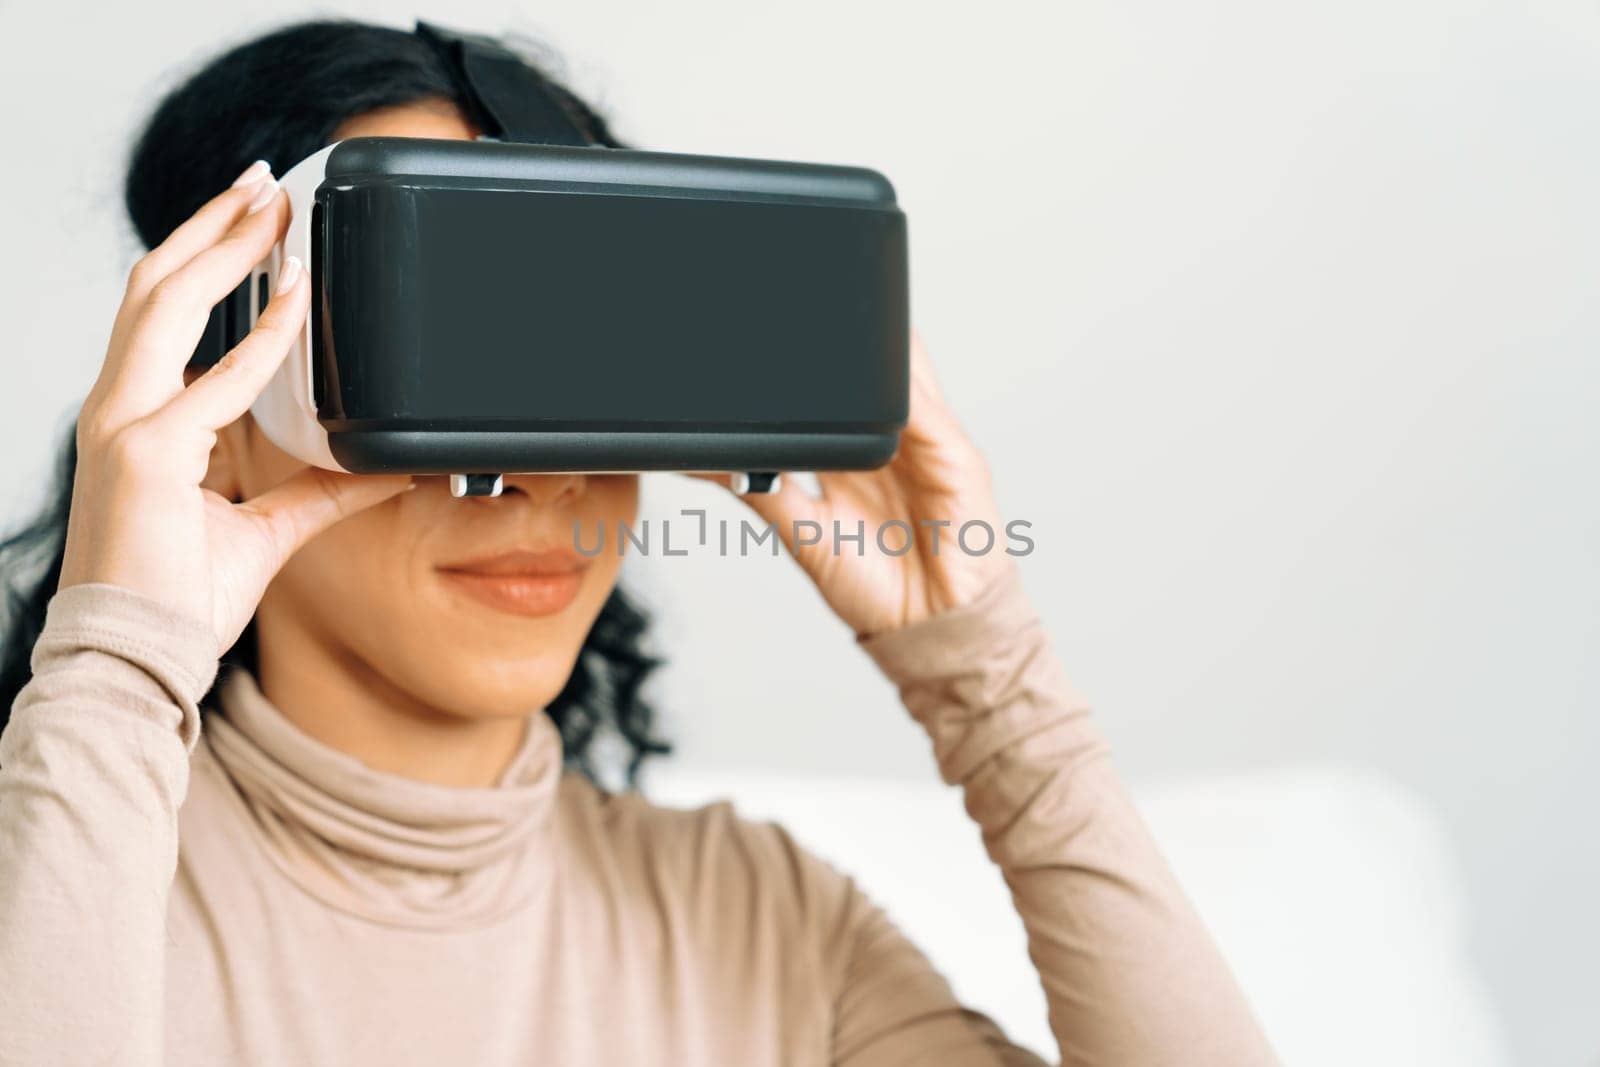 Young woman using virtual reality VR goggle at home for crucial online shopping experience. The virtual reality VR innovation optimized for female digital entertainment lifestyle.